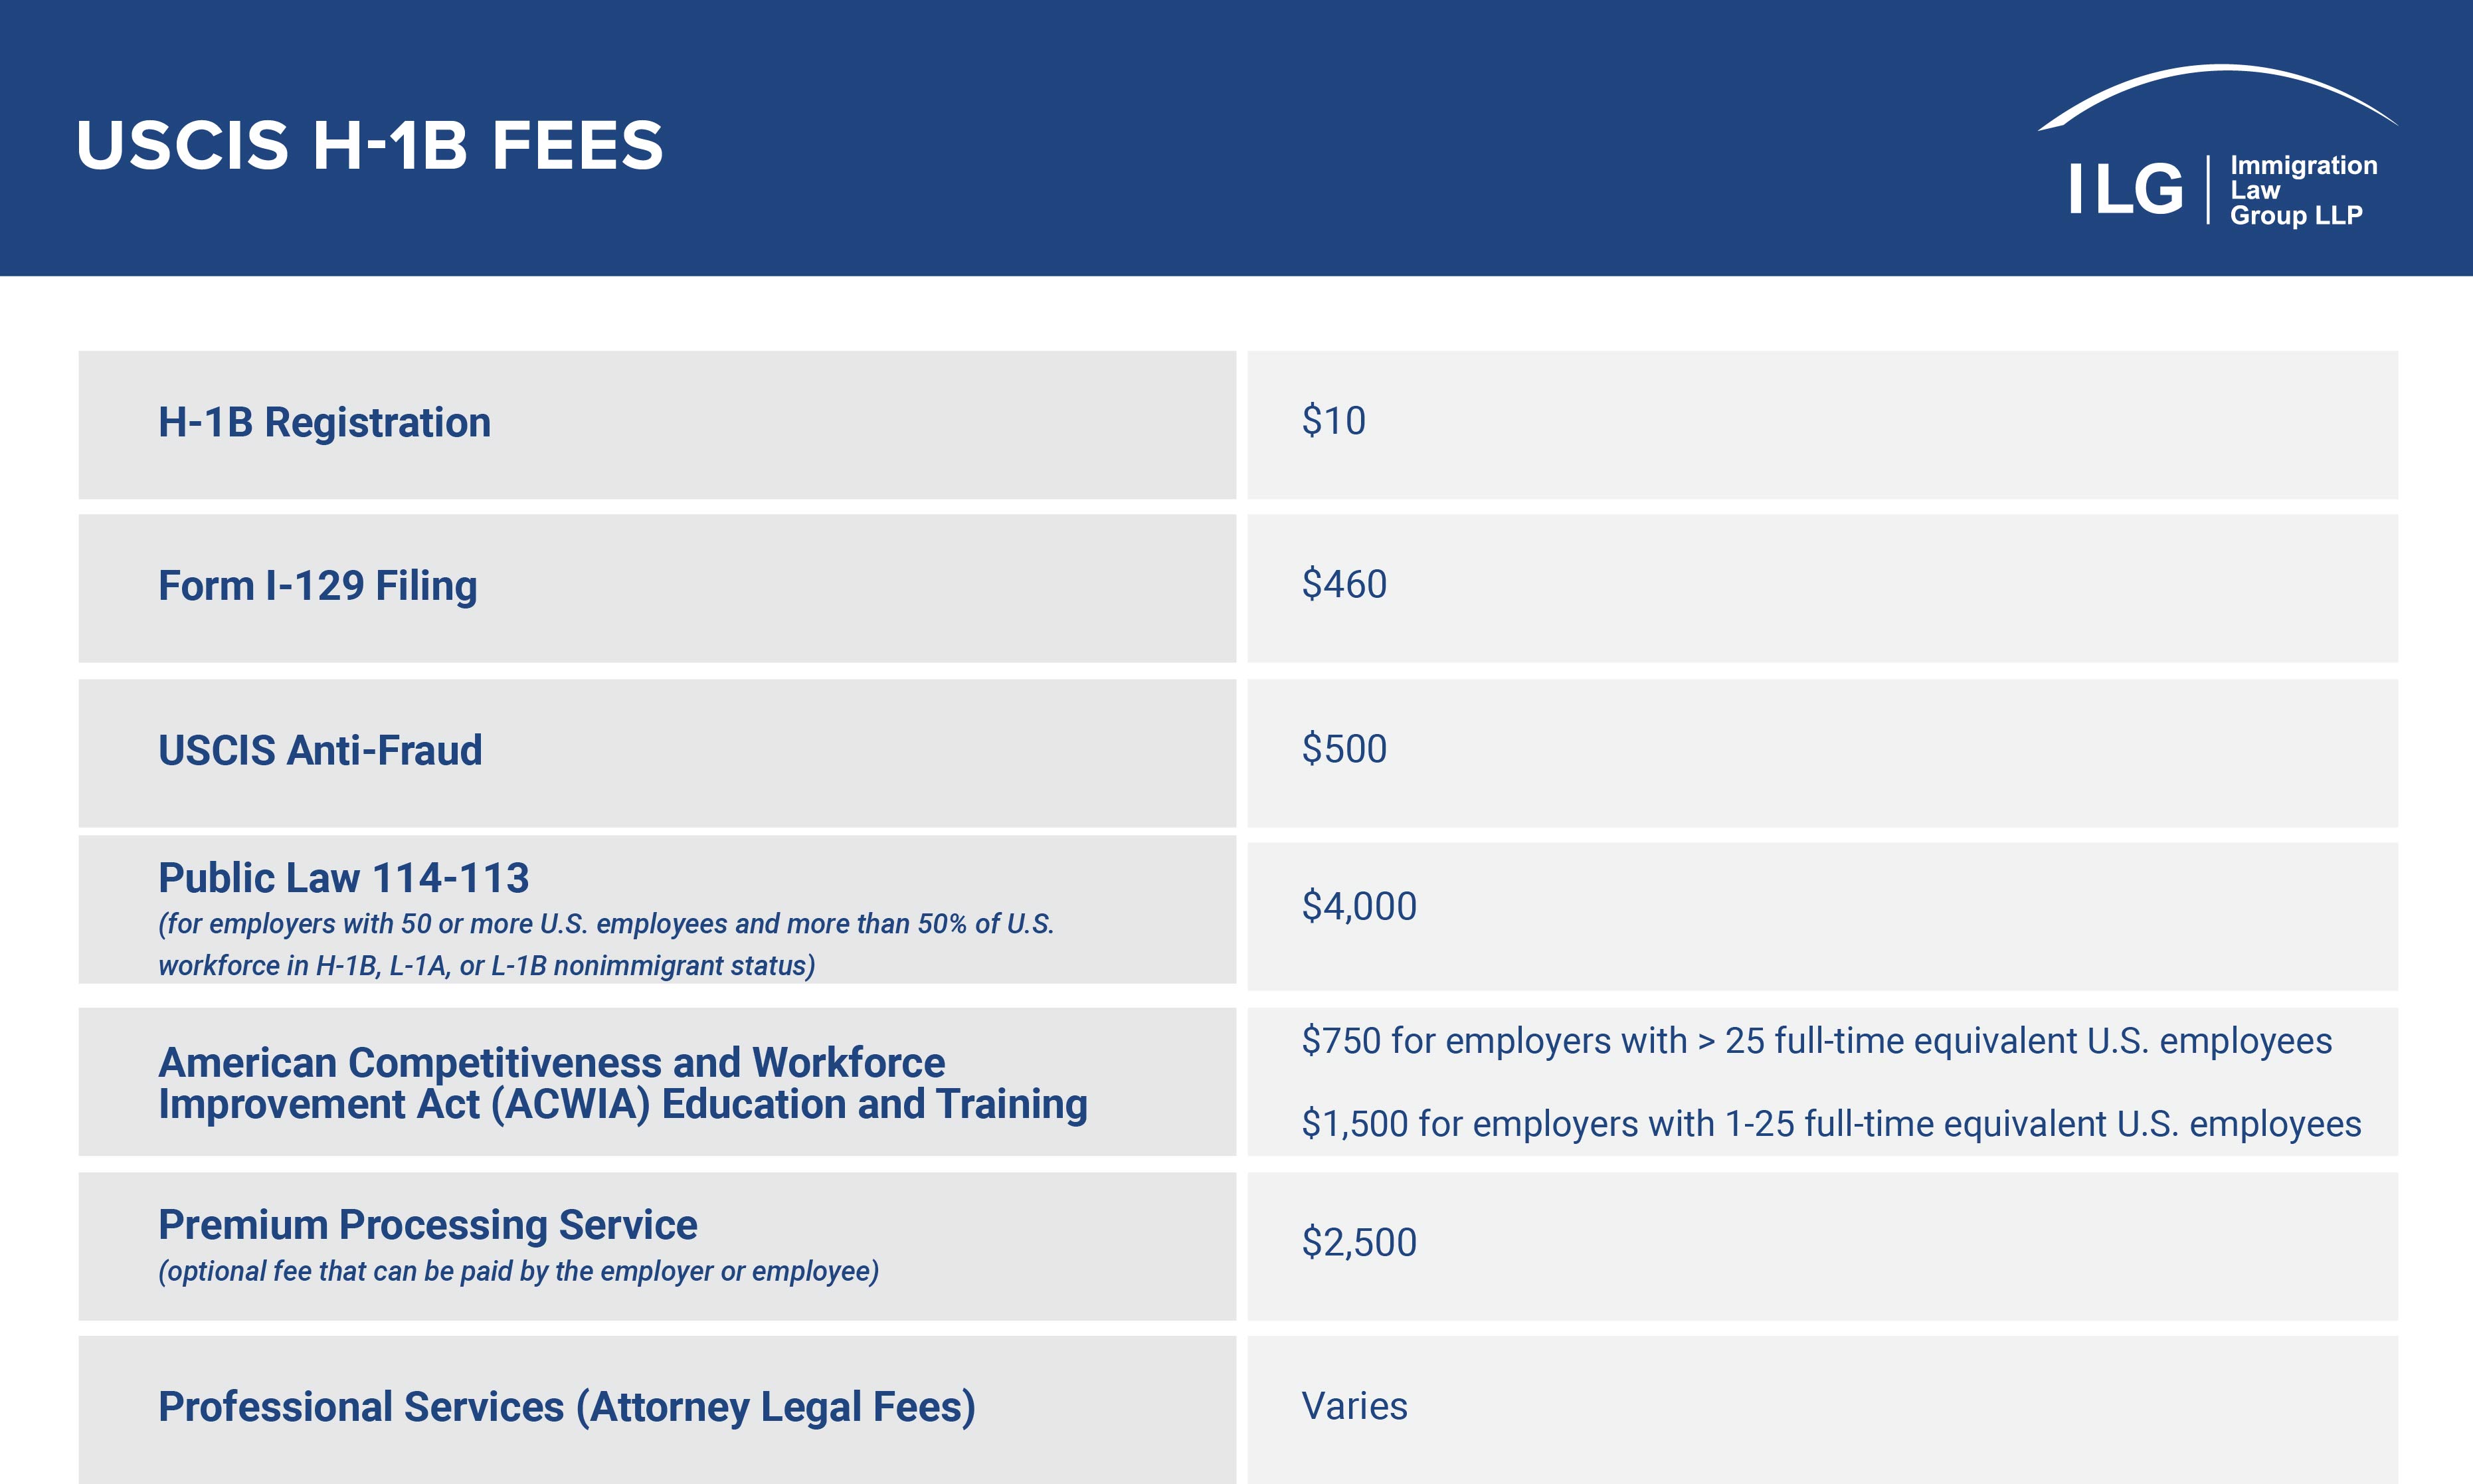 H-1B Fees_Immigration Law Group LLP